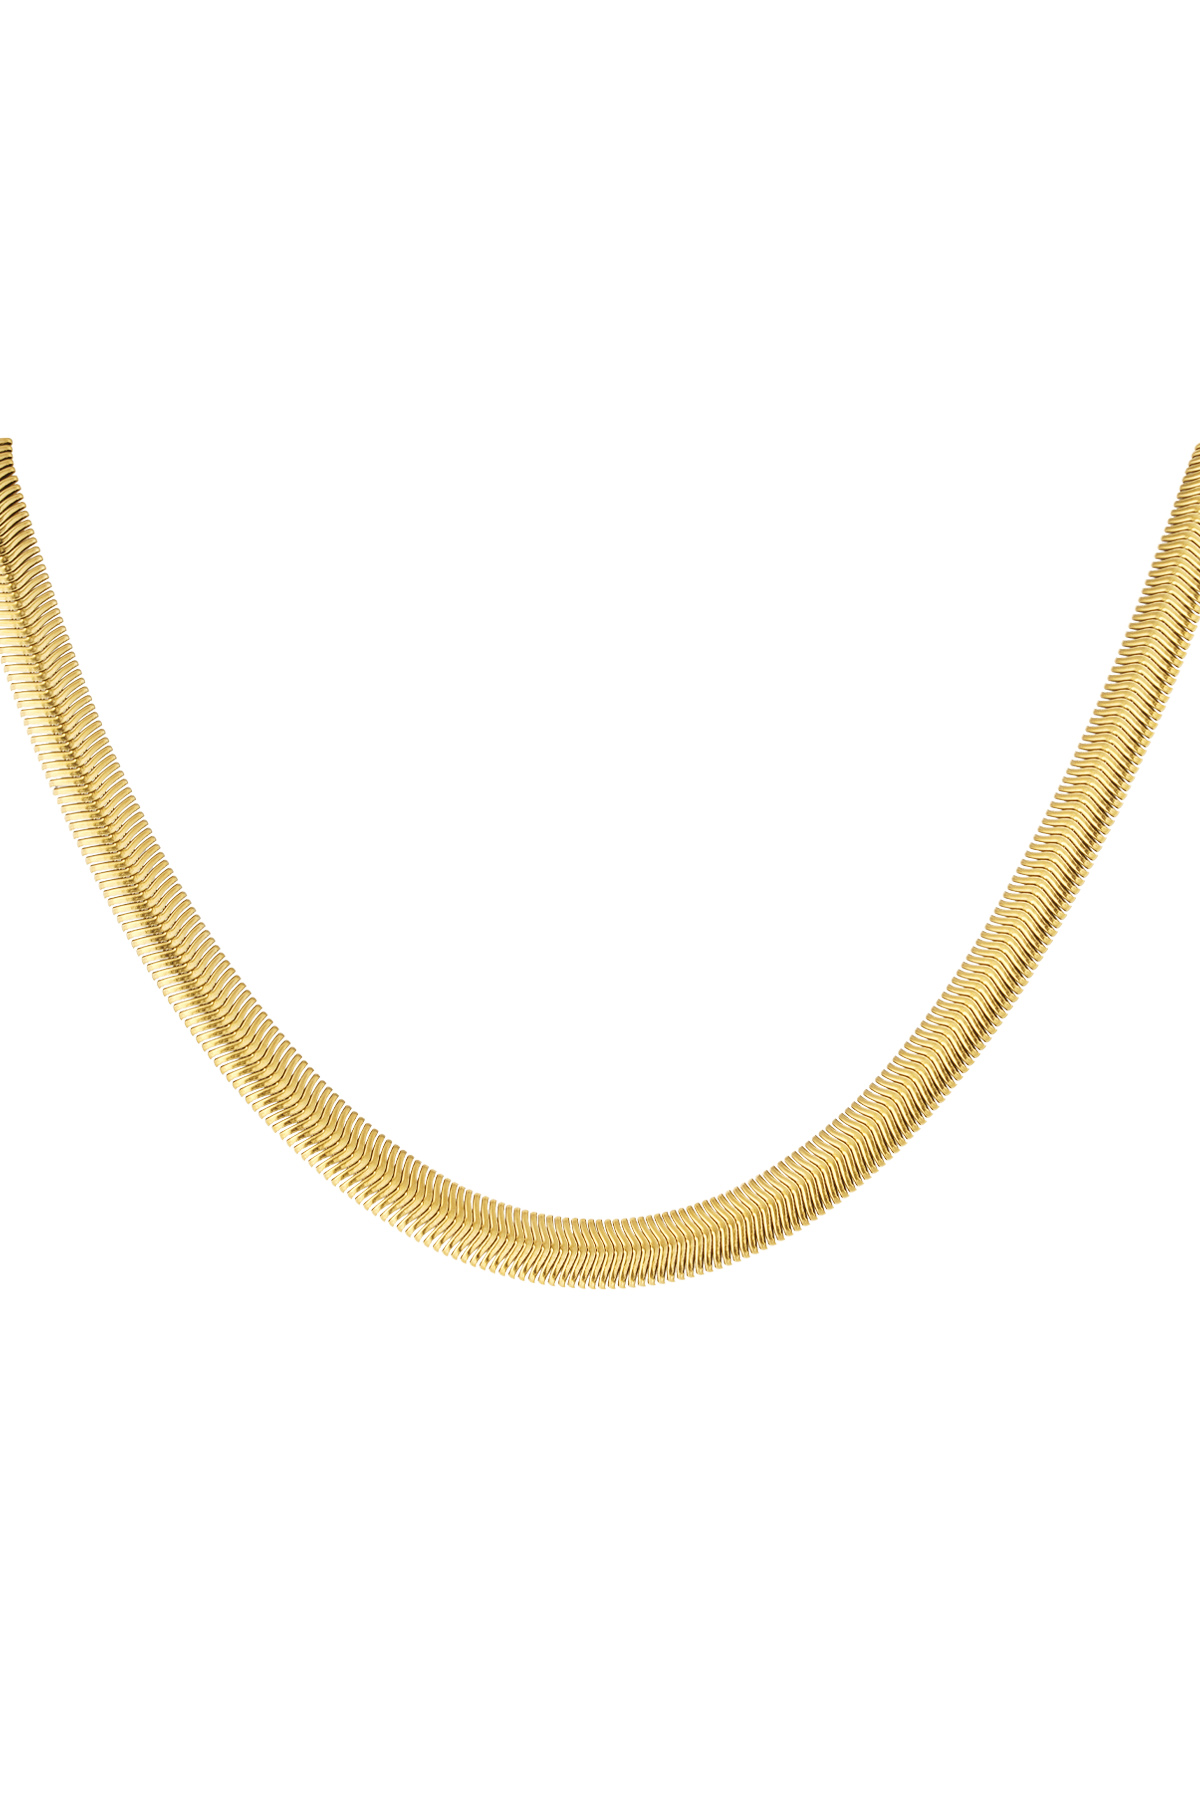 Necklace flat braided - gold